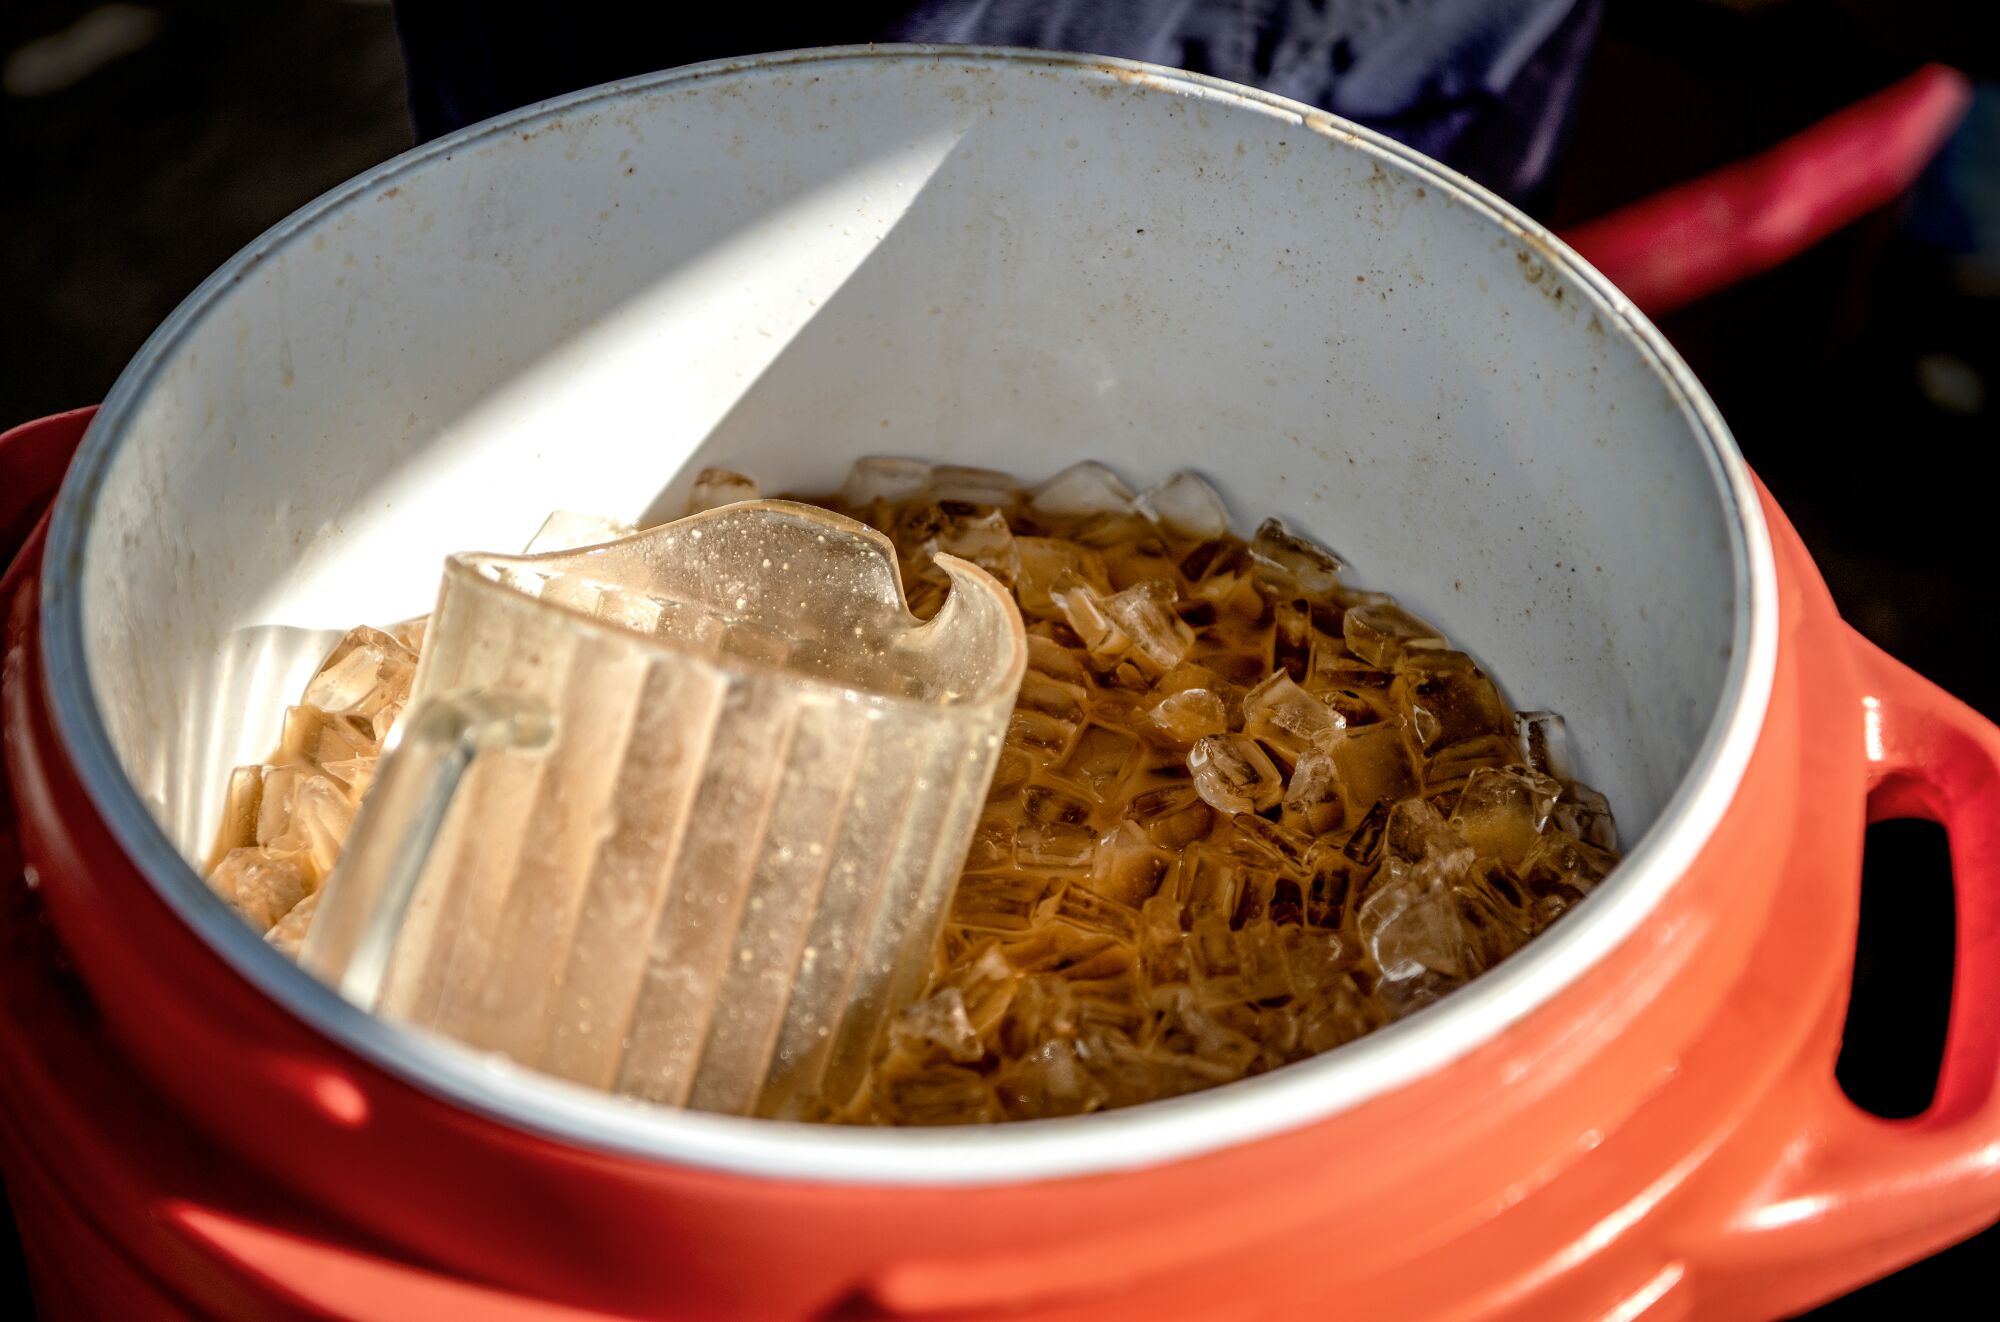 A plastic pitcher floats in a cooler filled with ice and tejuino.